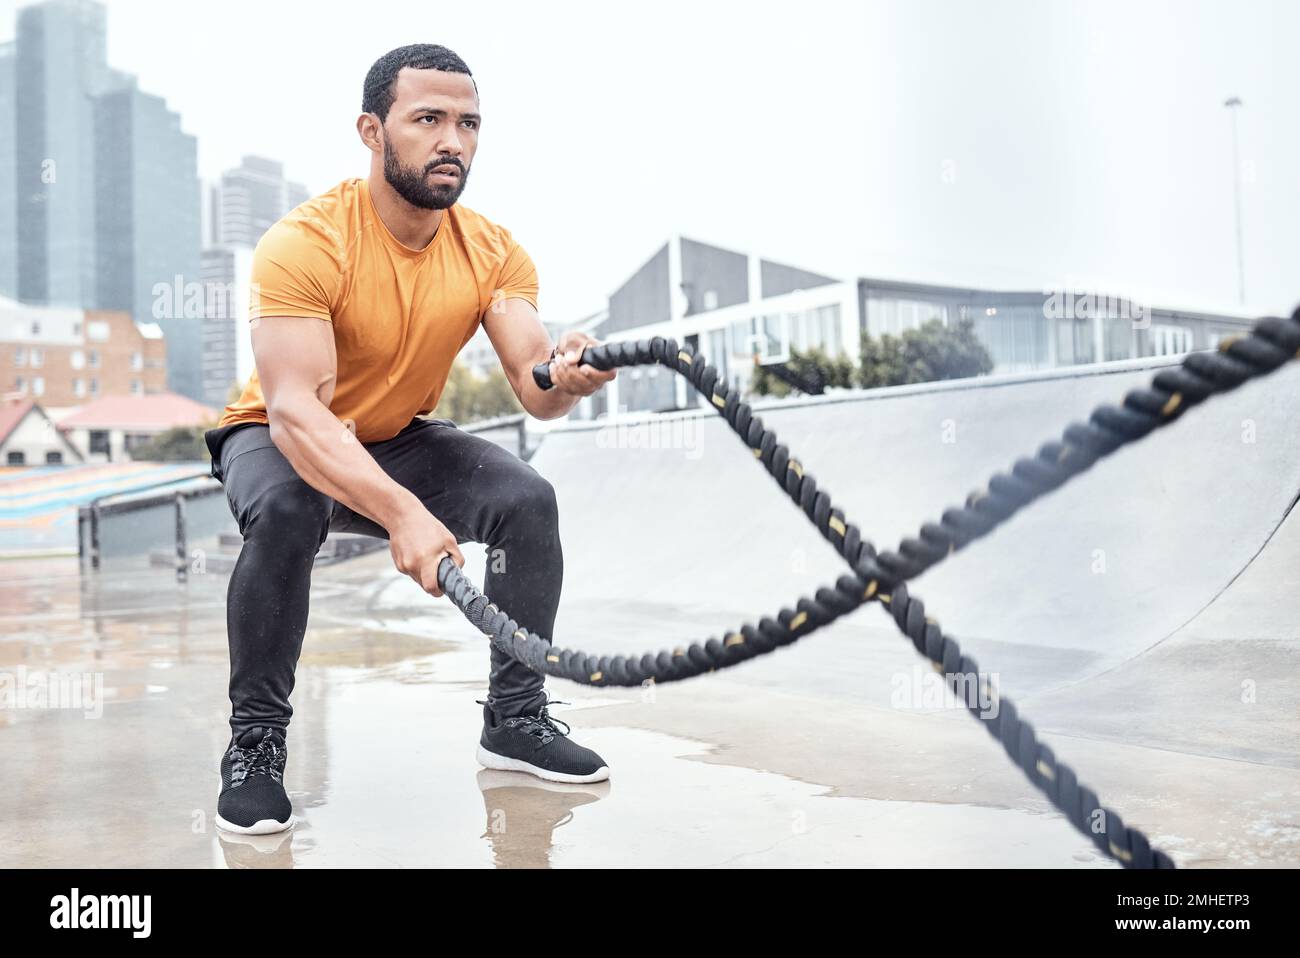 Outdoor, exercise and man with ropes, workout or training for